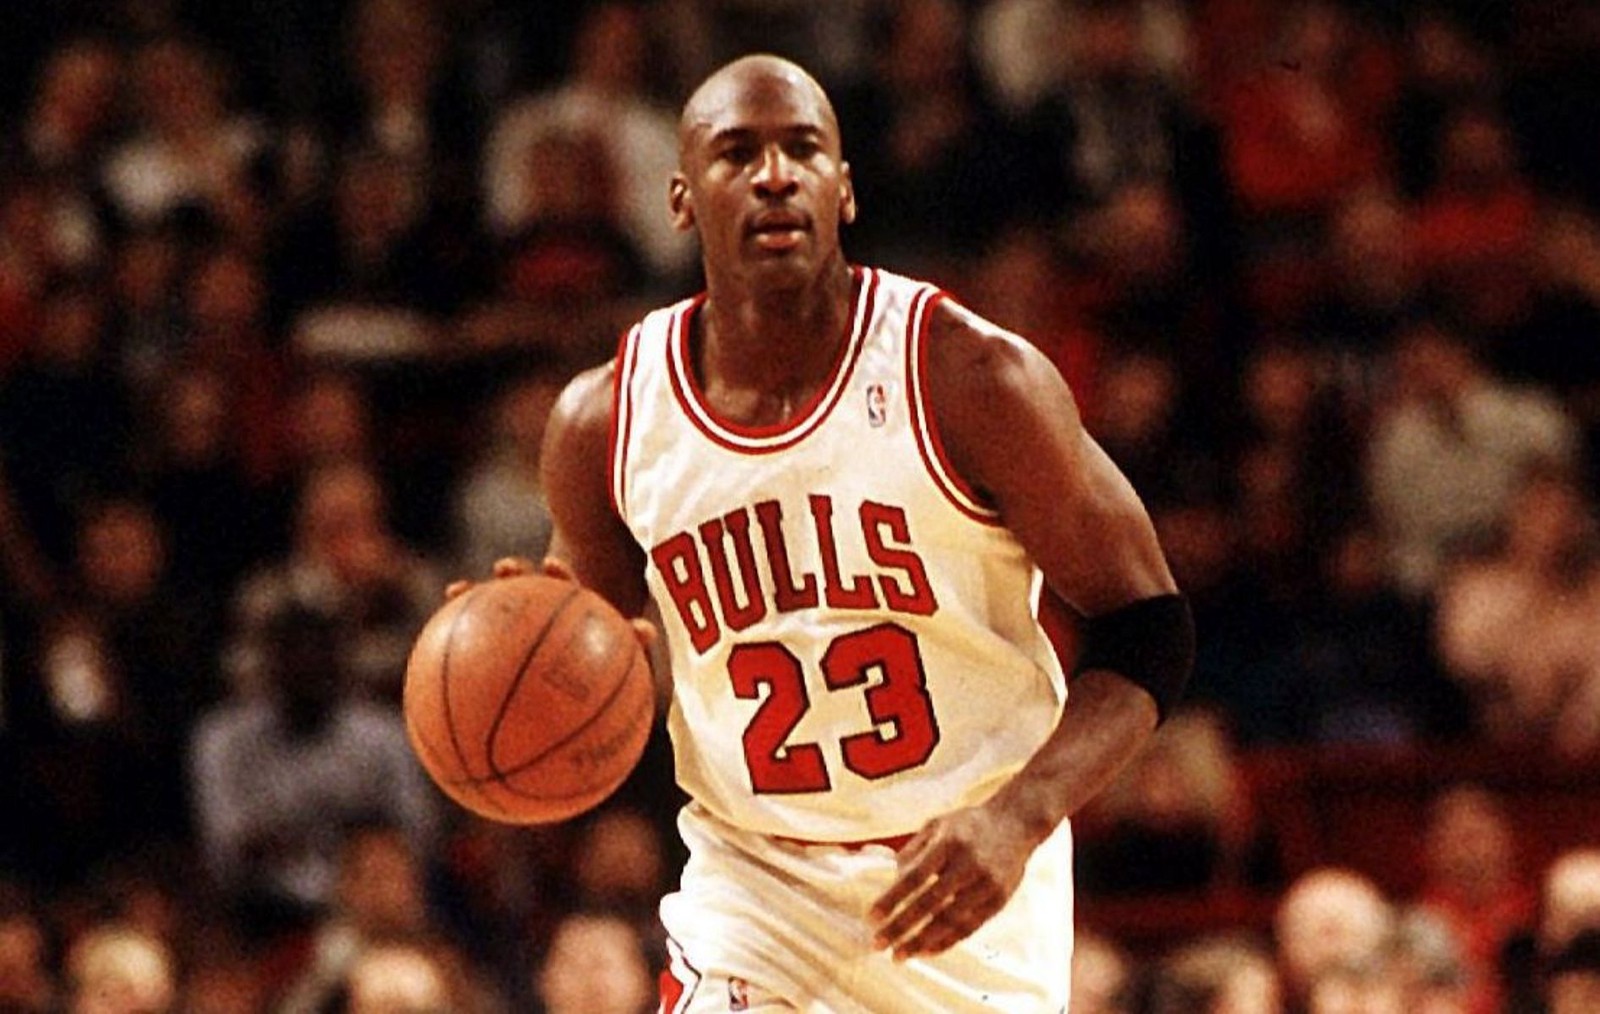 Let’s See How Much Random Trivia You Reallllly Know. Can You Get 18/24 on This Quiz? Michael Jordan